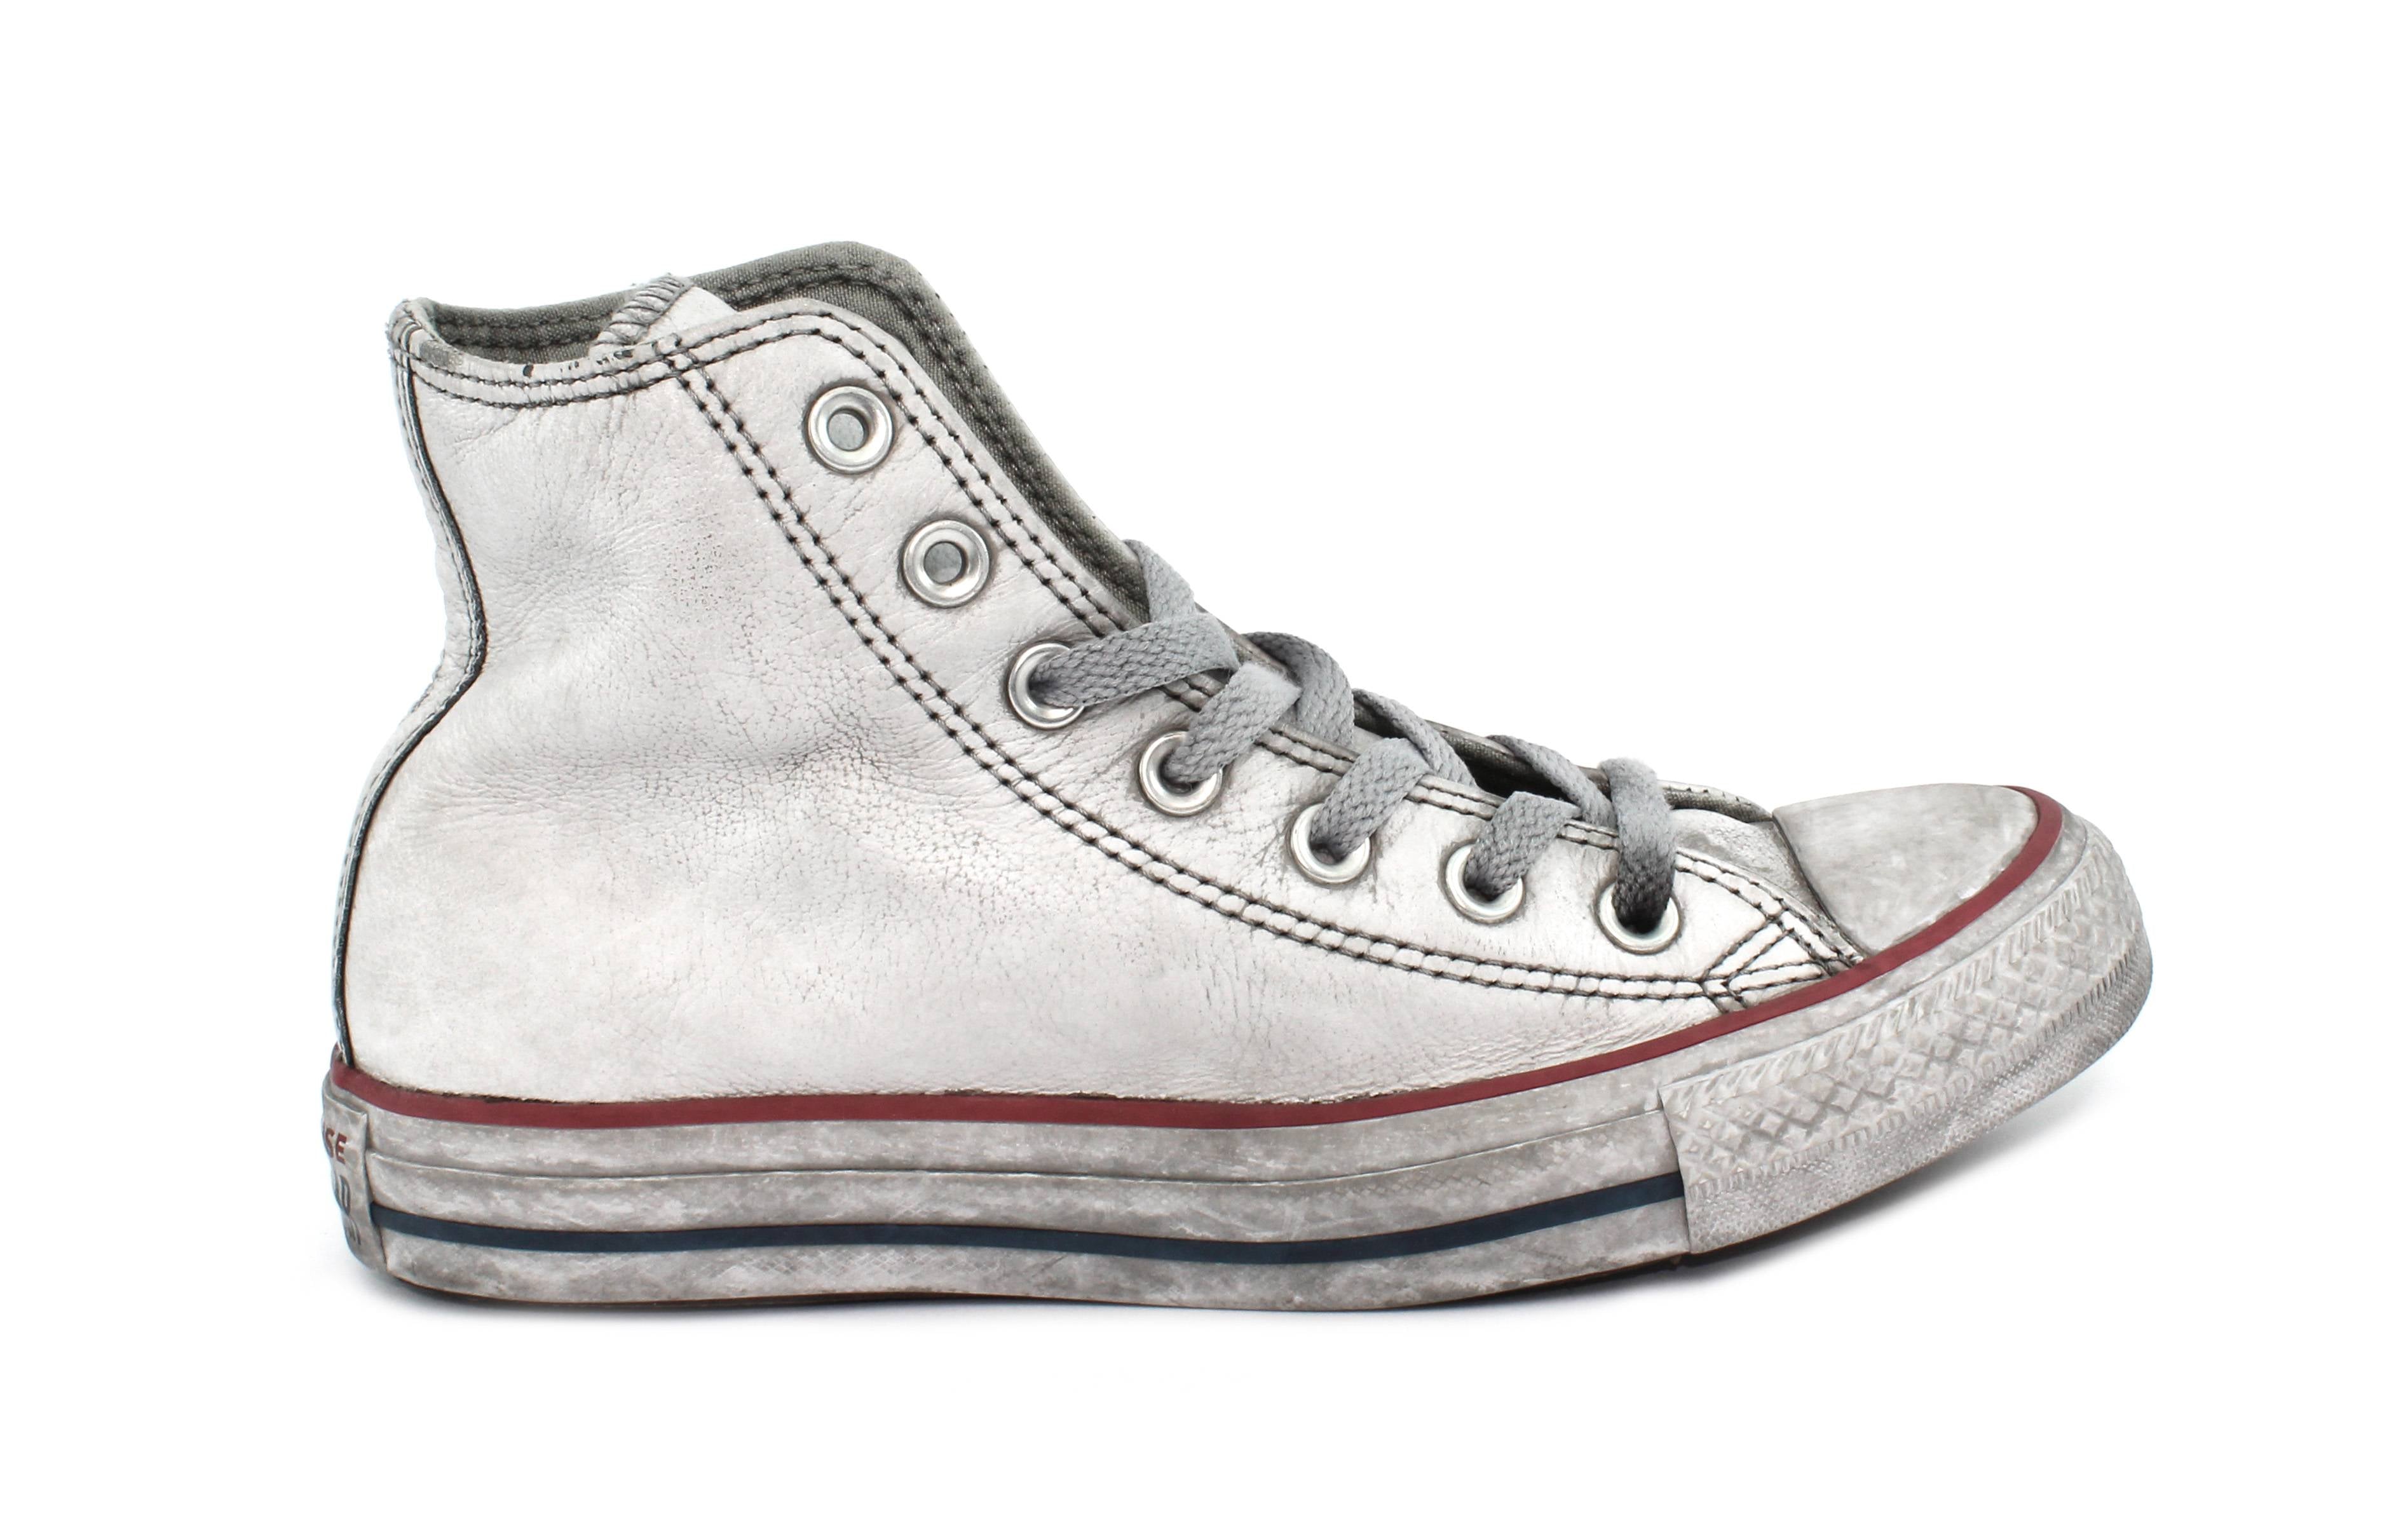 CONVERSE Leather 158576C White/Gray online